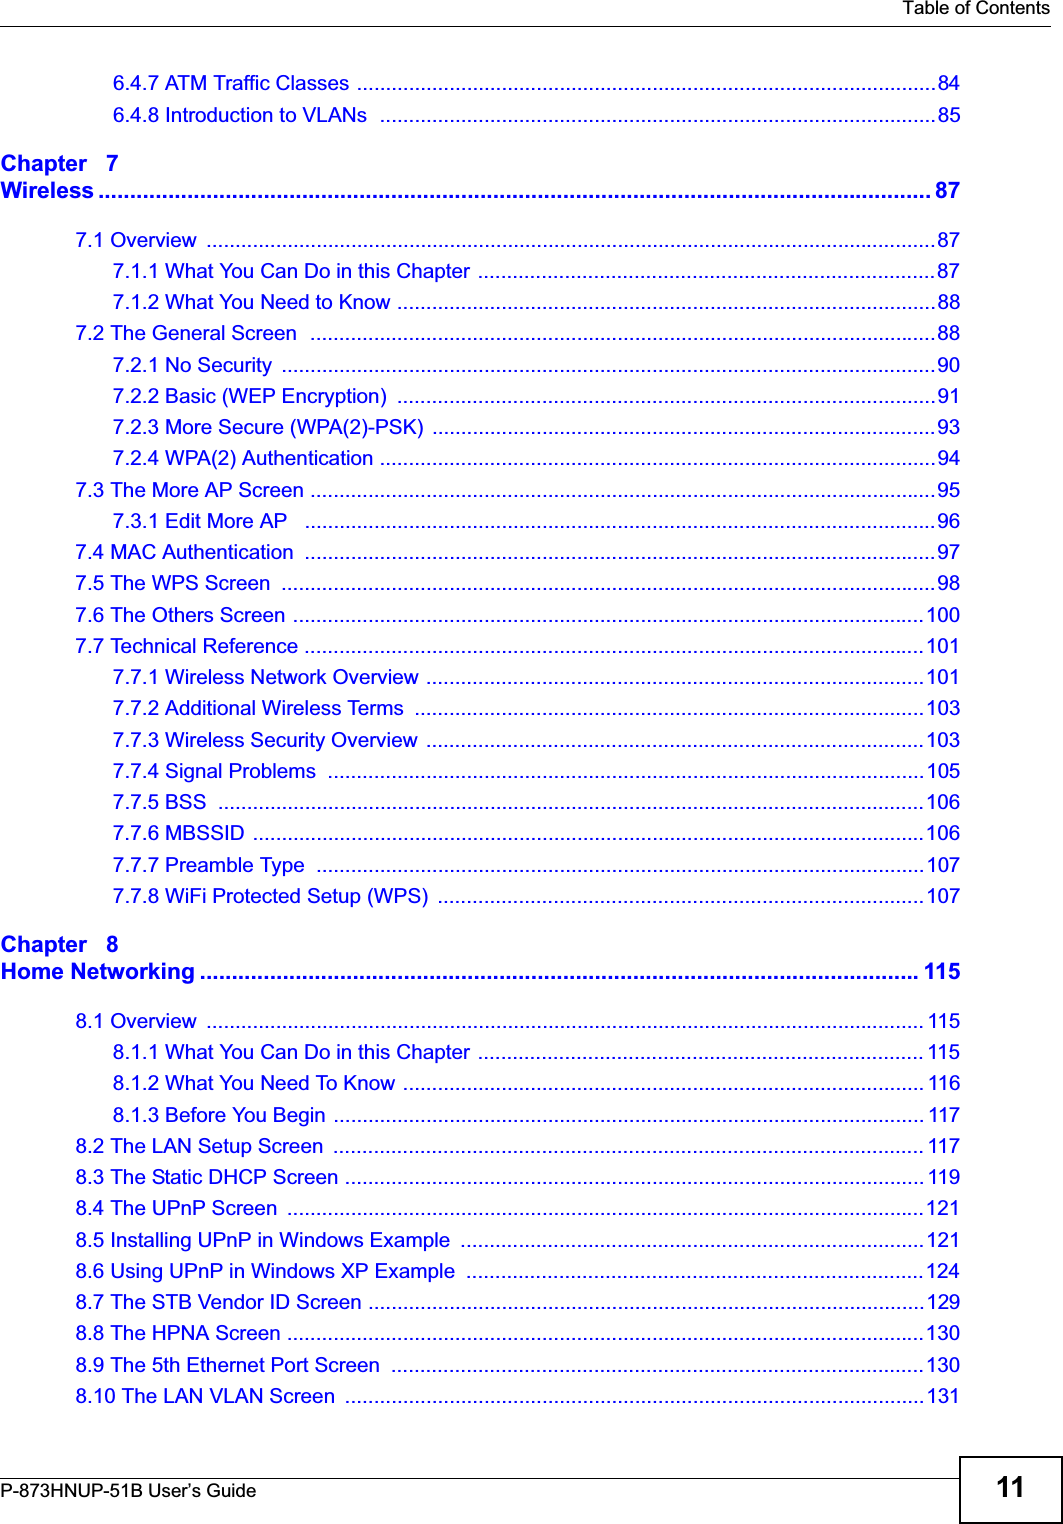   Table of ContentsP-873HNUP-51B User’s Guide 116.4.7 ATM Traffic Classes ....................................................................................................846.4.8 Introduction to VLANs  ................................................................................................85Chapter   7Wireless ................................................................................................................................... 877.1 Overview  ..............................................................................................................................877.1.1 What You Can Do in this Chapter ...............................................................................877.1.2 What You Need to Know .............................................................................................887.2 The General Screen  ............................................................................................................887.2.1 No Security  .................................................................................................................907.2.2 Basic (WEP Encryption)  .............................................................................................917.2.3 More Secure (WPA(2)-PSK)  .......................................................................................937.2.4 WPA(2) Authentication ................................................................................................947.3 The More AP Screen ............................................................................................................957.3.1 Edit More AP   .............................................................................................................967.4 MAC Authentication  .............................................................................................................977.5 The WPS Screen  .................................................................................................................987.6 The Others Screen .............................................................................................................1007.7 Technical Reference ...........................................................................................................1017.7.1 Wireless Network Overview ......................................................................................1017.7.2 Additional Wireless Terms  ........................................................................................1037.7.3 Wireless Security Overview  ......................................................................................1037.7.4 Signal Problems  .......................................................................................................1057.7.5 BSS  ..........................................................................................................................1067.7.6 MBSSID ....................................................................................................................1067.7.7 Preamble Type  .........................................................................................................1077.7.8 WiFi Protected Setup (WPS)  ....................................................................................107Chapter   8Home Networking .................................................................................................................1158.1 Overview  ............................................................................................................................ 1158.1.1 What You Can Do in this Chapter ............................................................................. 1158.1.2 What You Need To Know .......................................................................................... 1168.1.3 Before You Begin ...................................................................................................... 1178.2 The LAN Setup Screen  ...................................................................................................... 1178.3 The Static DHCP Screen .................................................................................................... 1198.4 The UPnP Screen  ..............................................................................................................1218.5 Installing UPnP in Windows Example  ................................................................................1218.6 Using UPnP in Windows XP Example  ...............................................................................1248.7 The STB Vendor ID Screen ................................................................................................1298.8 The HPNA Screen ..............................................................................................................1308.9 The 5th Ethernet Port Screen  ............................................................................................1308.10 The LAN VLAN Screen  ....................................................................................................131